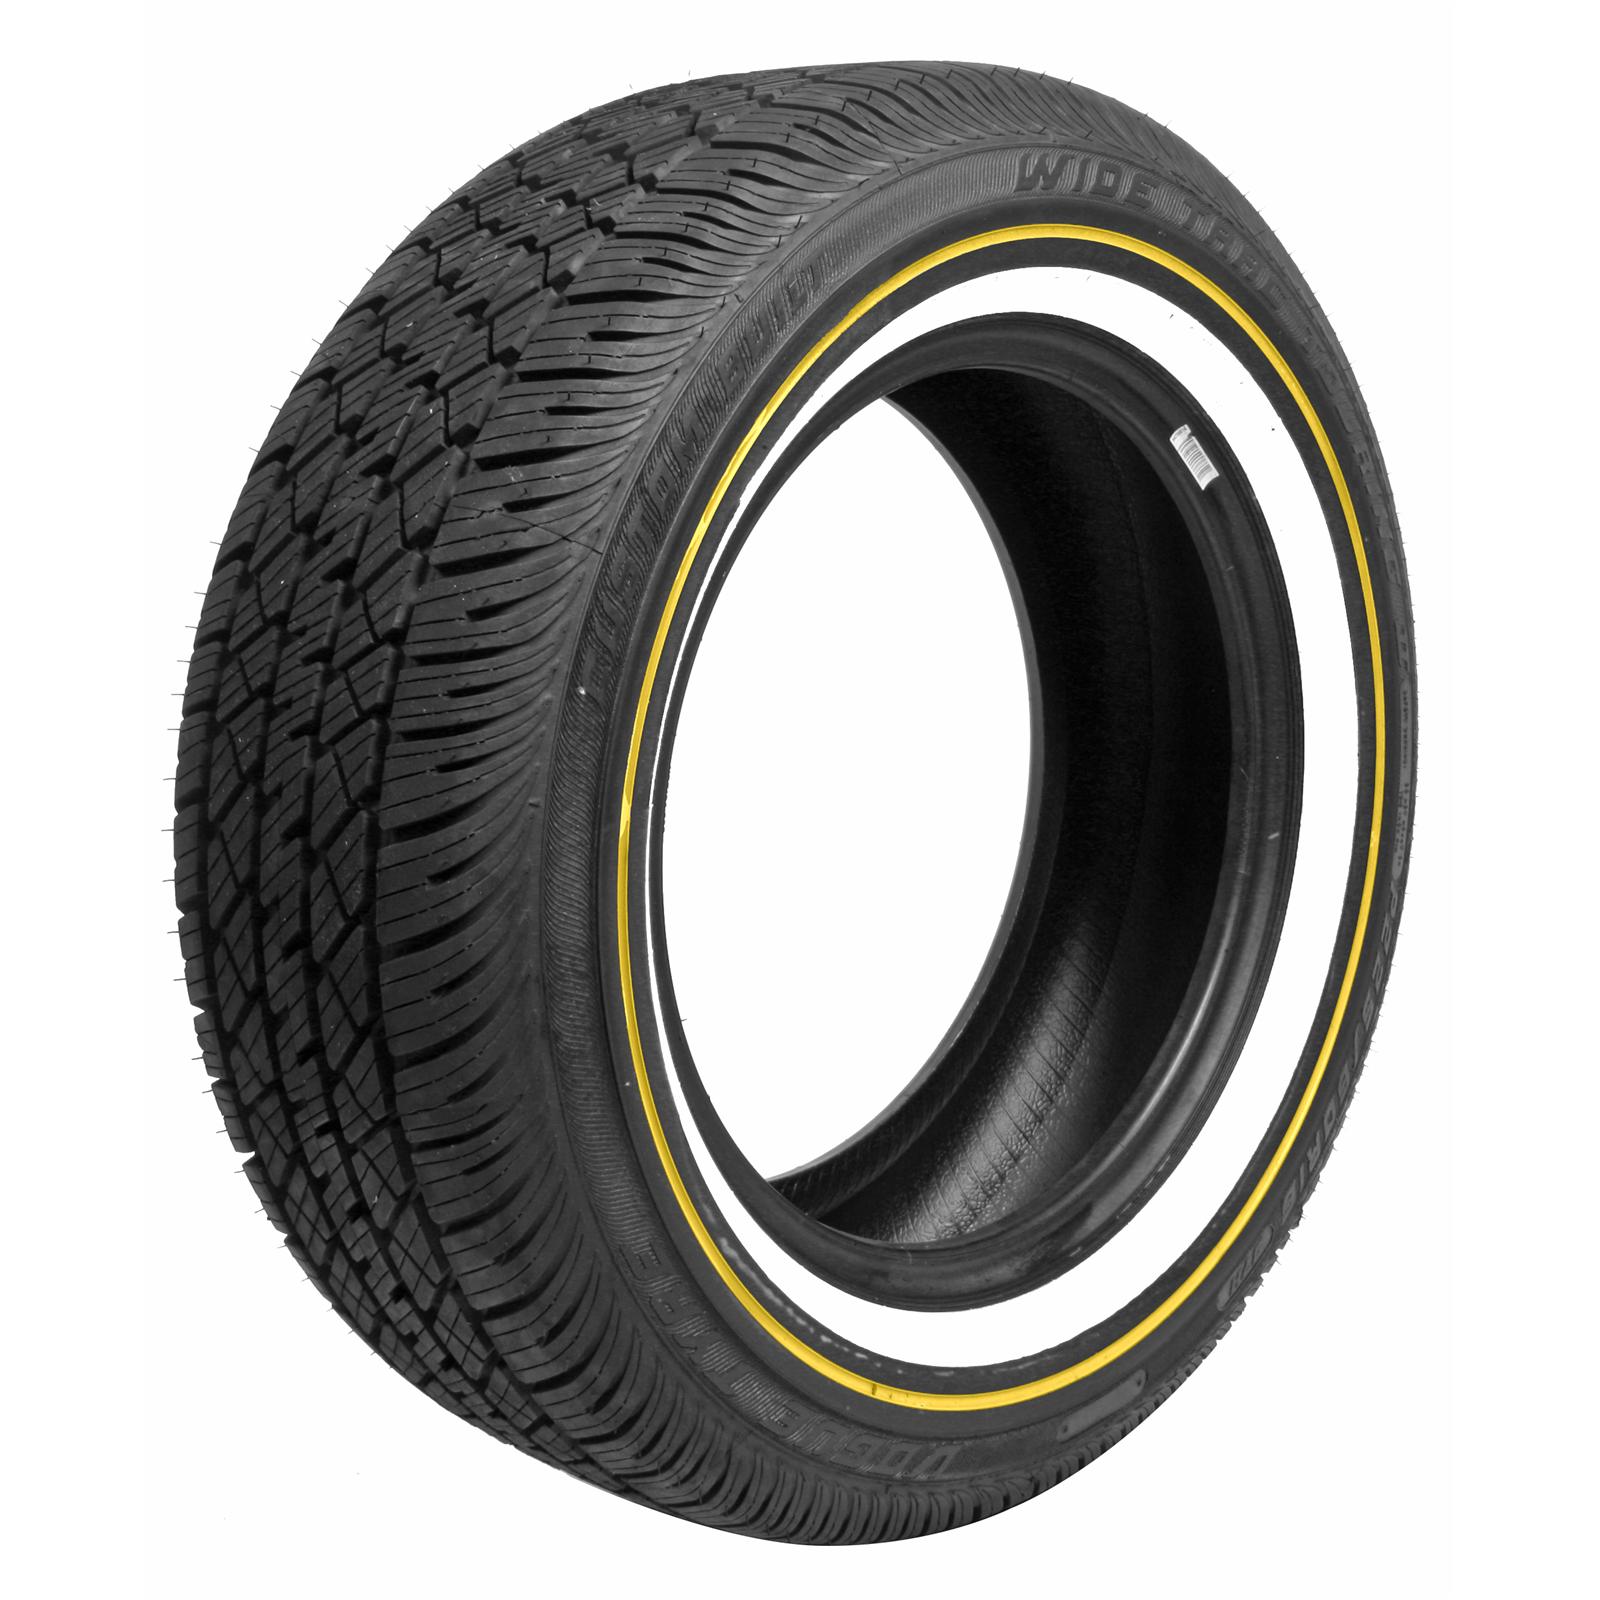 Vogue Tyre 1145171 - Vogue Tyre Tires. vgt-23028_oh.jpg. 